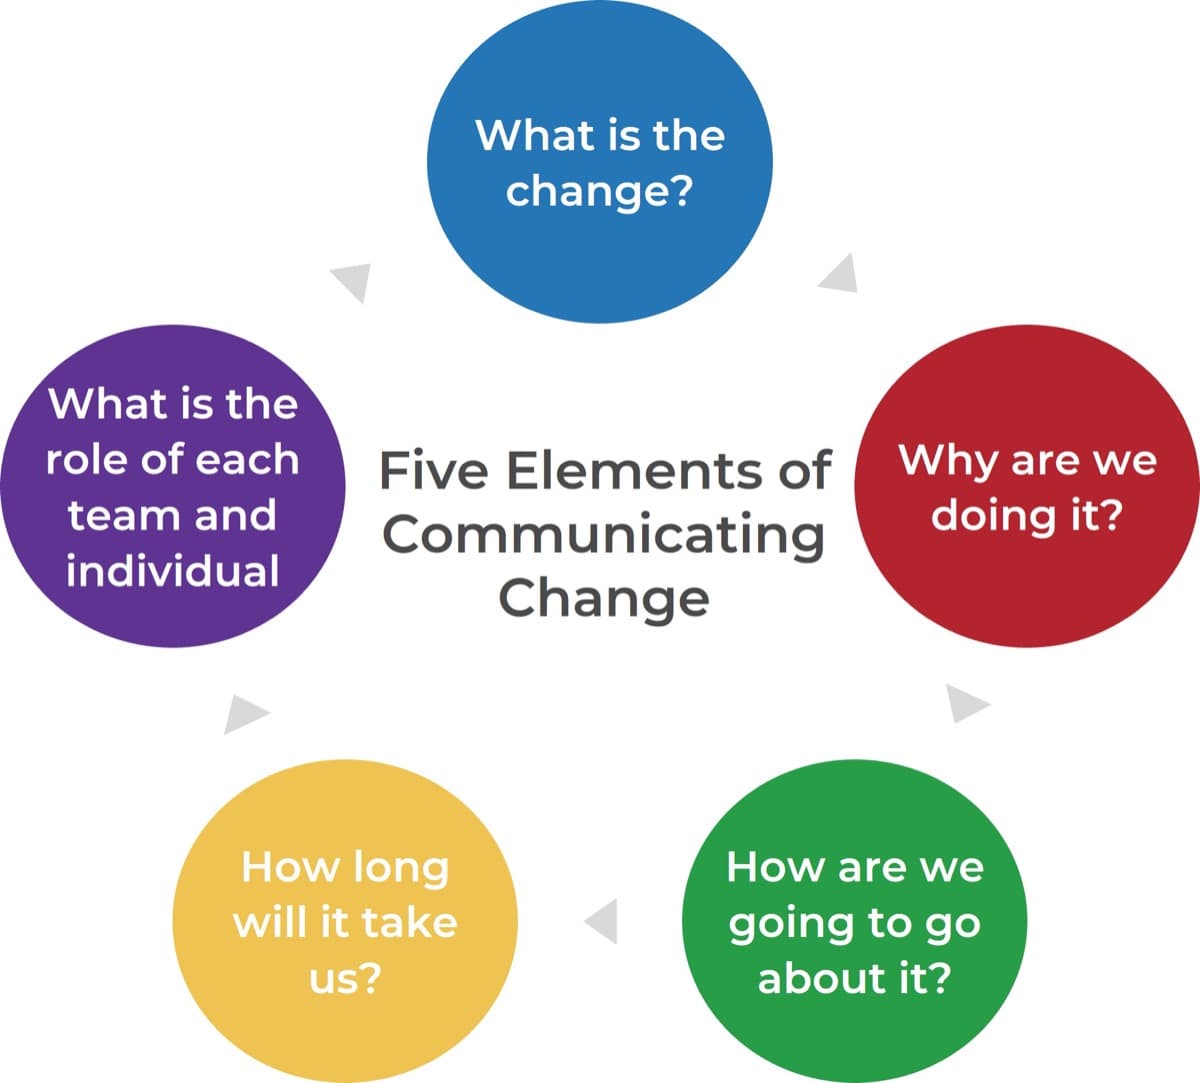 The image contains a screenshot of the Five Elements of Change that is displayed in a cycle. The five elements are: What is the change? Why are we doing it? How are we going to go about it? How long will it take us? What is the role of each team and individual.